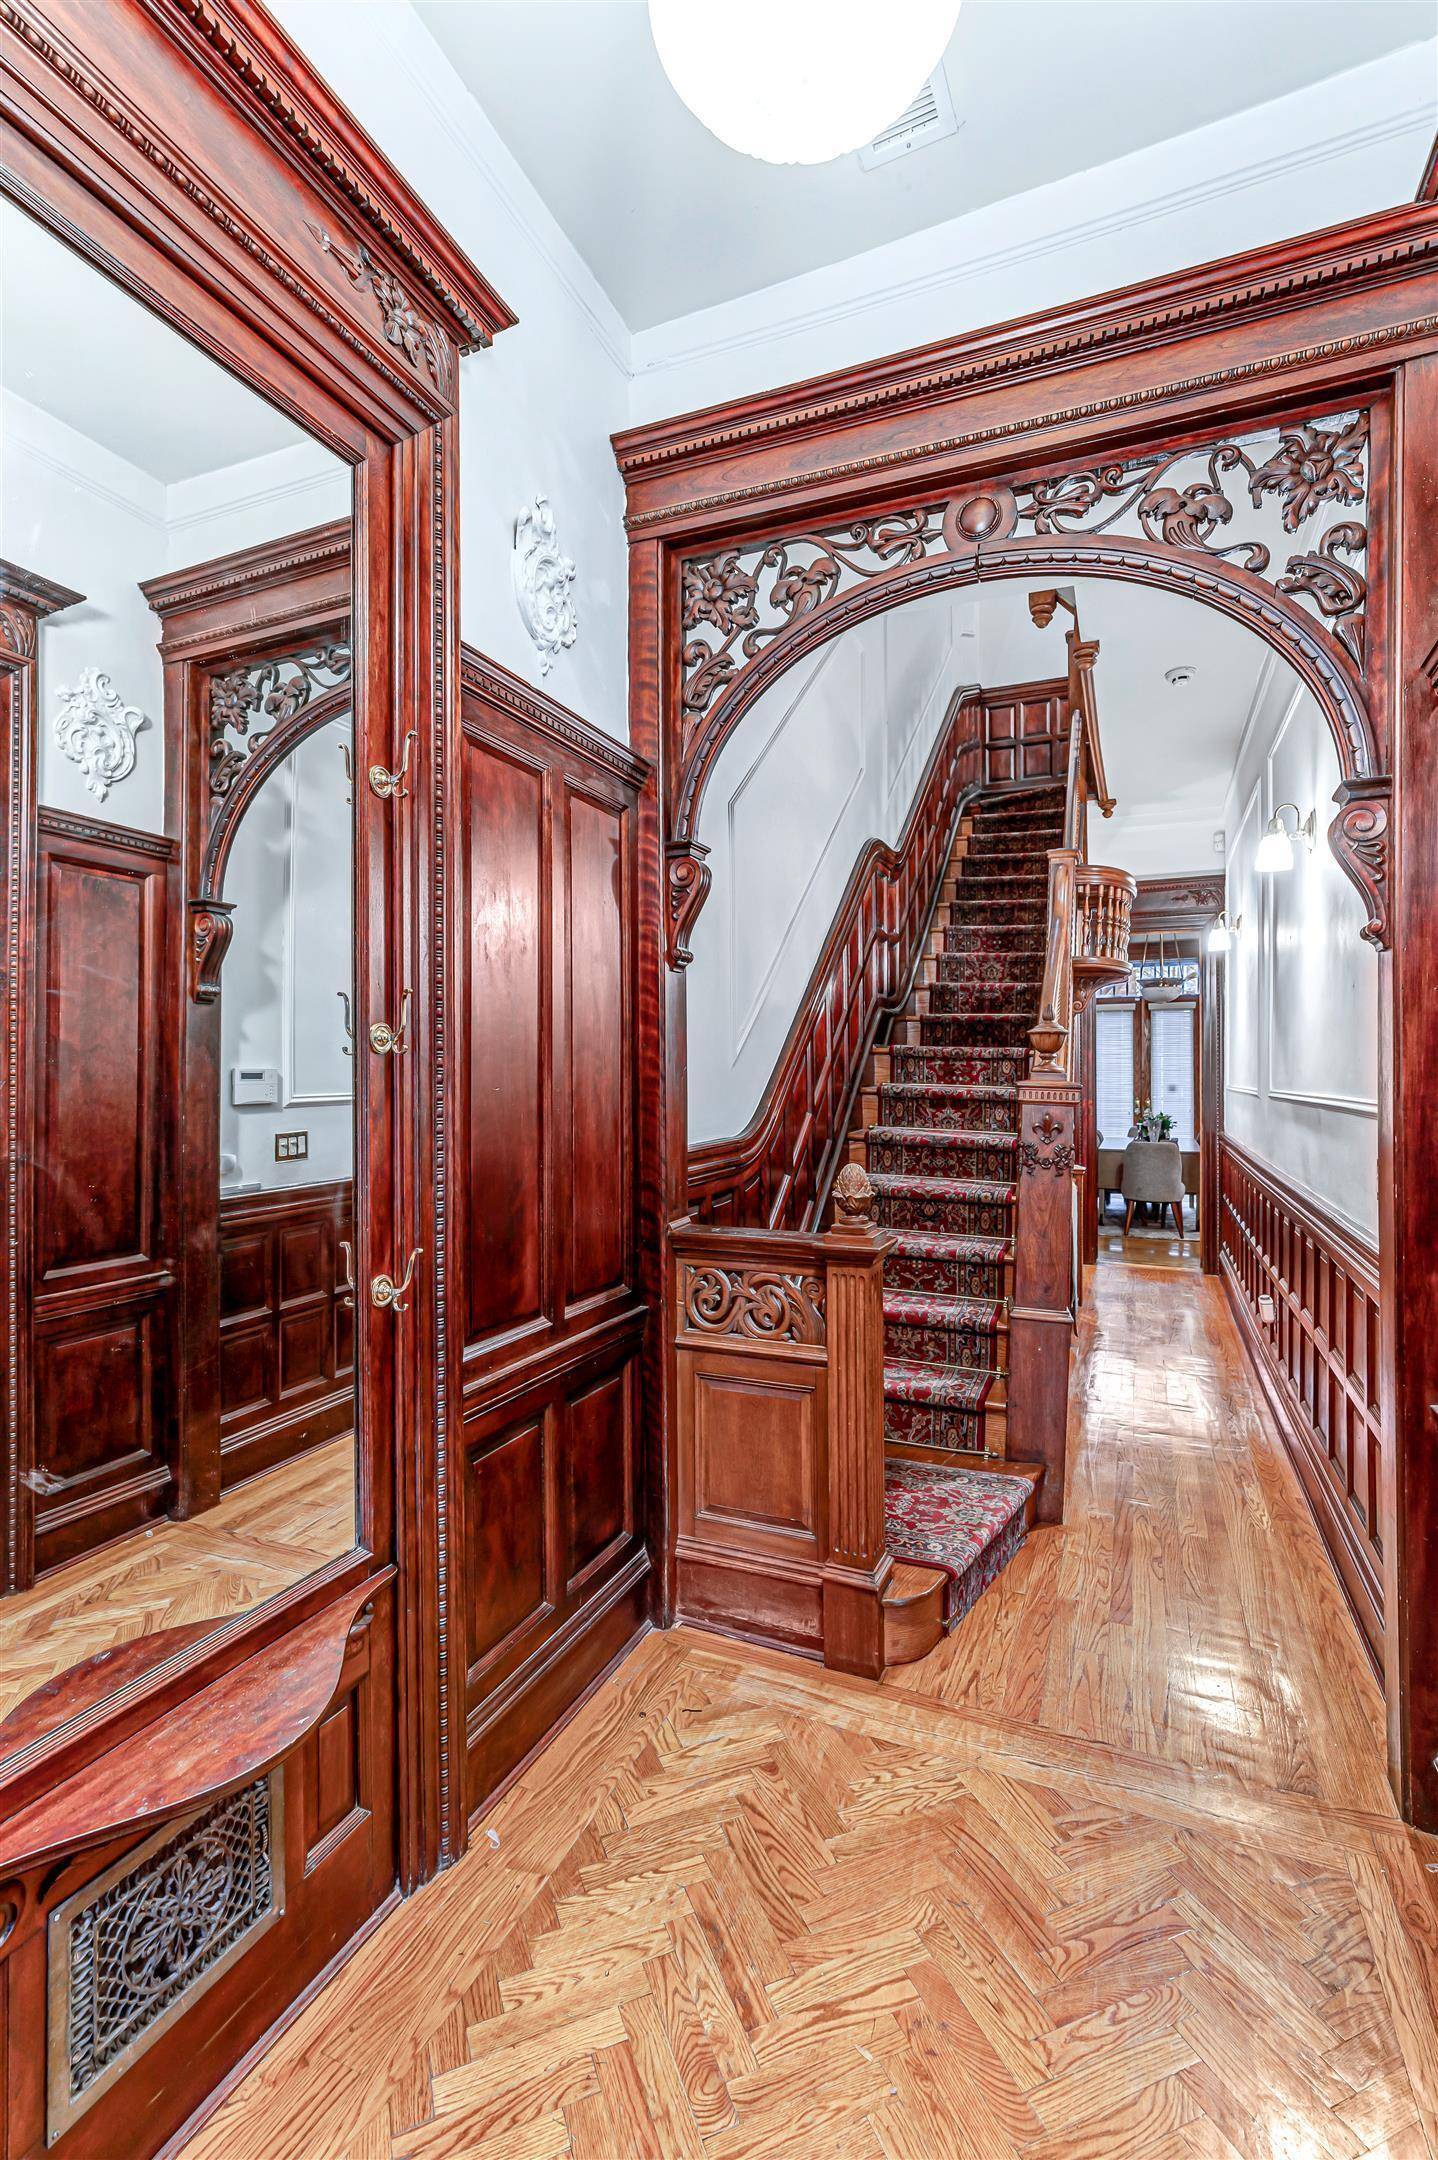 A picture perfect townhome in the famed Strivers Row neighborhood, this 19 ft wide home designed by architect John Hauser sits on a quintessential brownstone street in the heart of ...